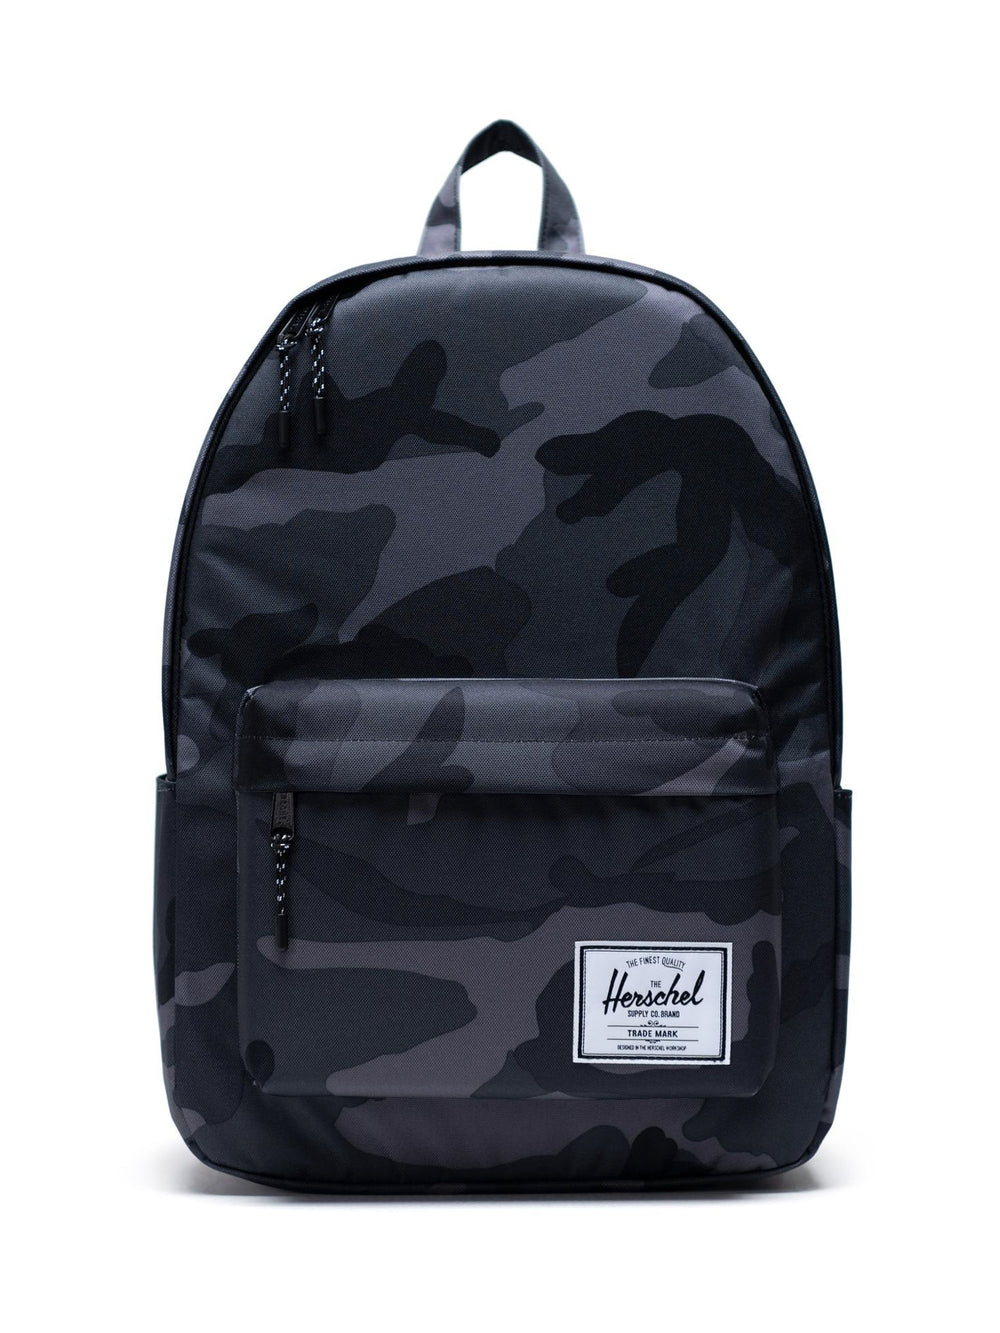 HERSCHEL SUPPLY CO. CLASSIC XL 30L BACKPACK - NIGHT CAMO - DÉSTOCKAGE